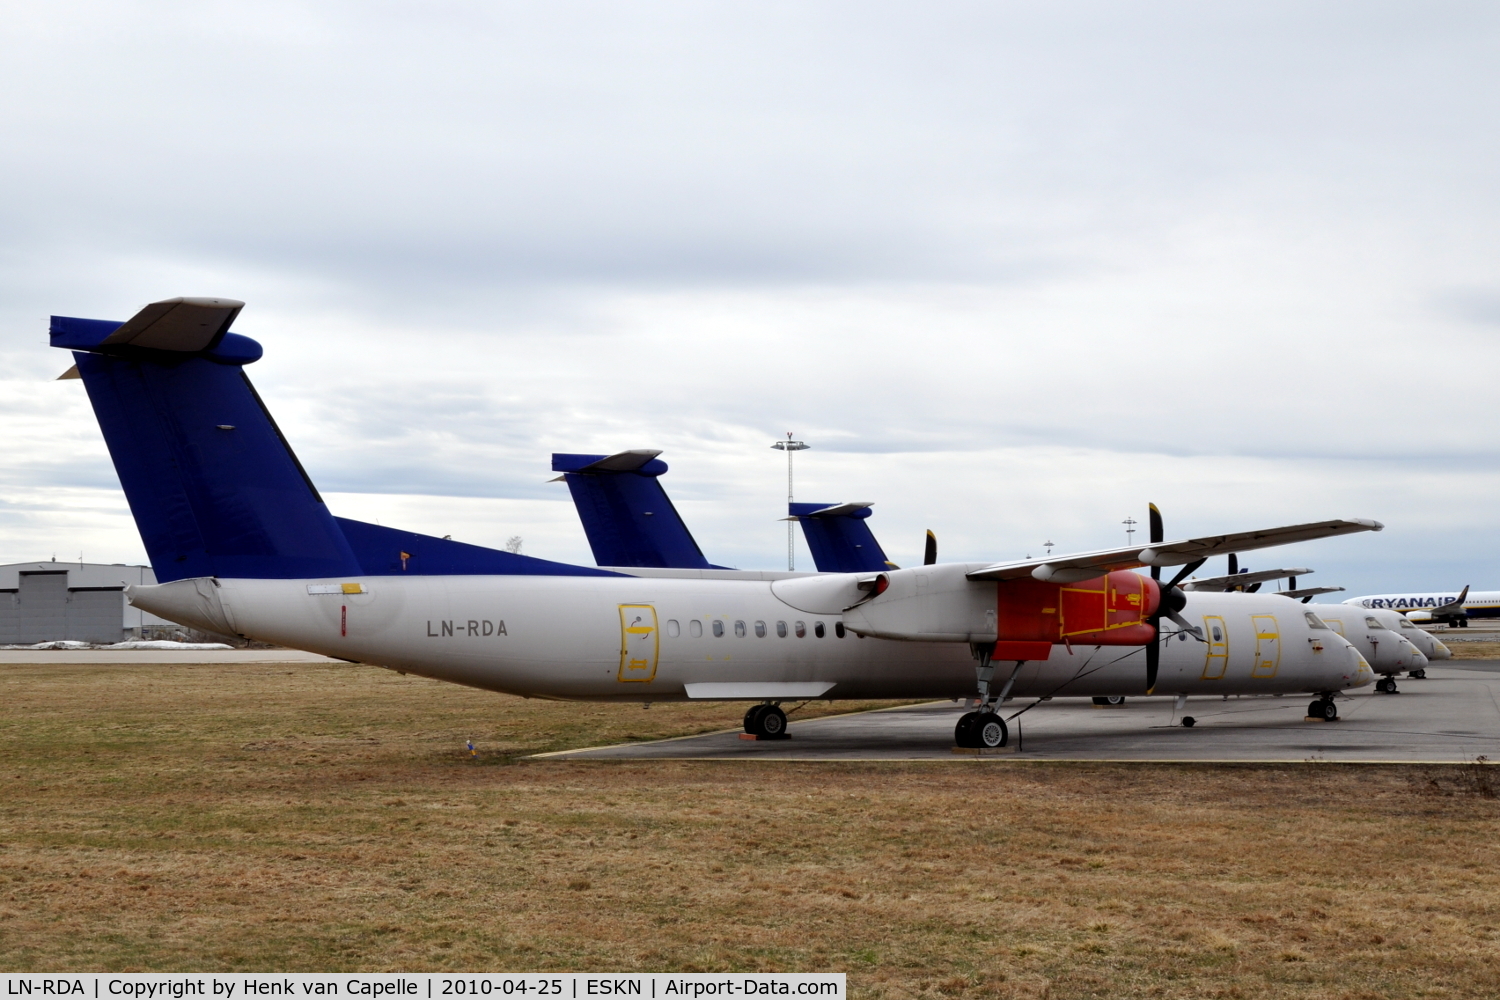 LN-RDA, 1999 De Havilland Canada DHC-8-402Q Dash 8 C/N 4013, SAS Commuter Dash 8 400s at Nyköping Skavsta airport in Sweden. These are LN-RDA (in front), LN-RDT and LN-RDP, which are in storage after being taken out of service by SAS after a series of main landing gear collapses.